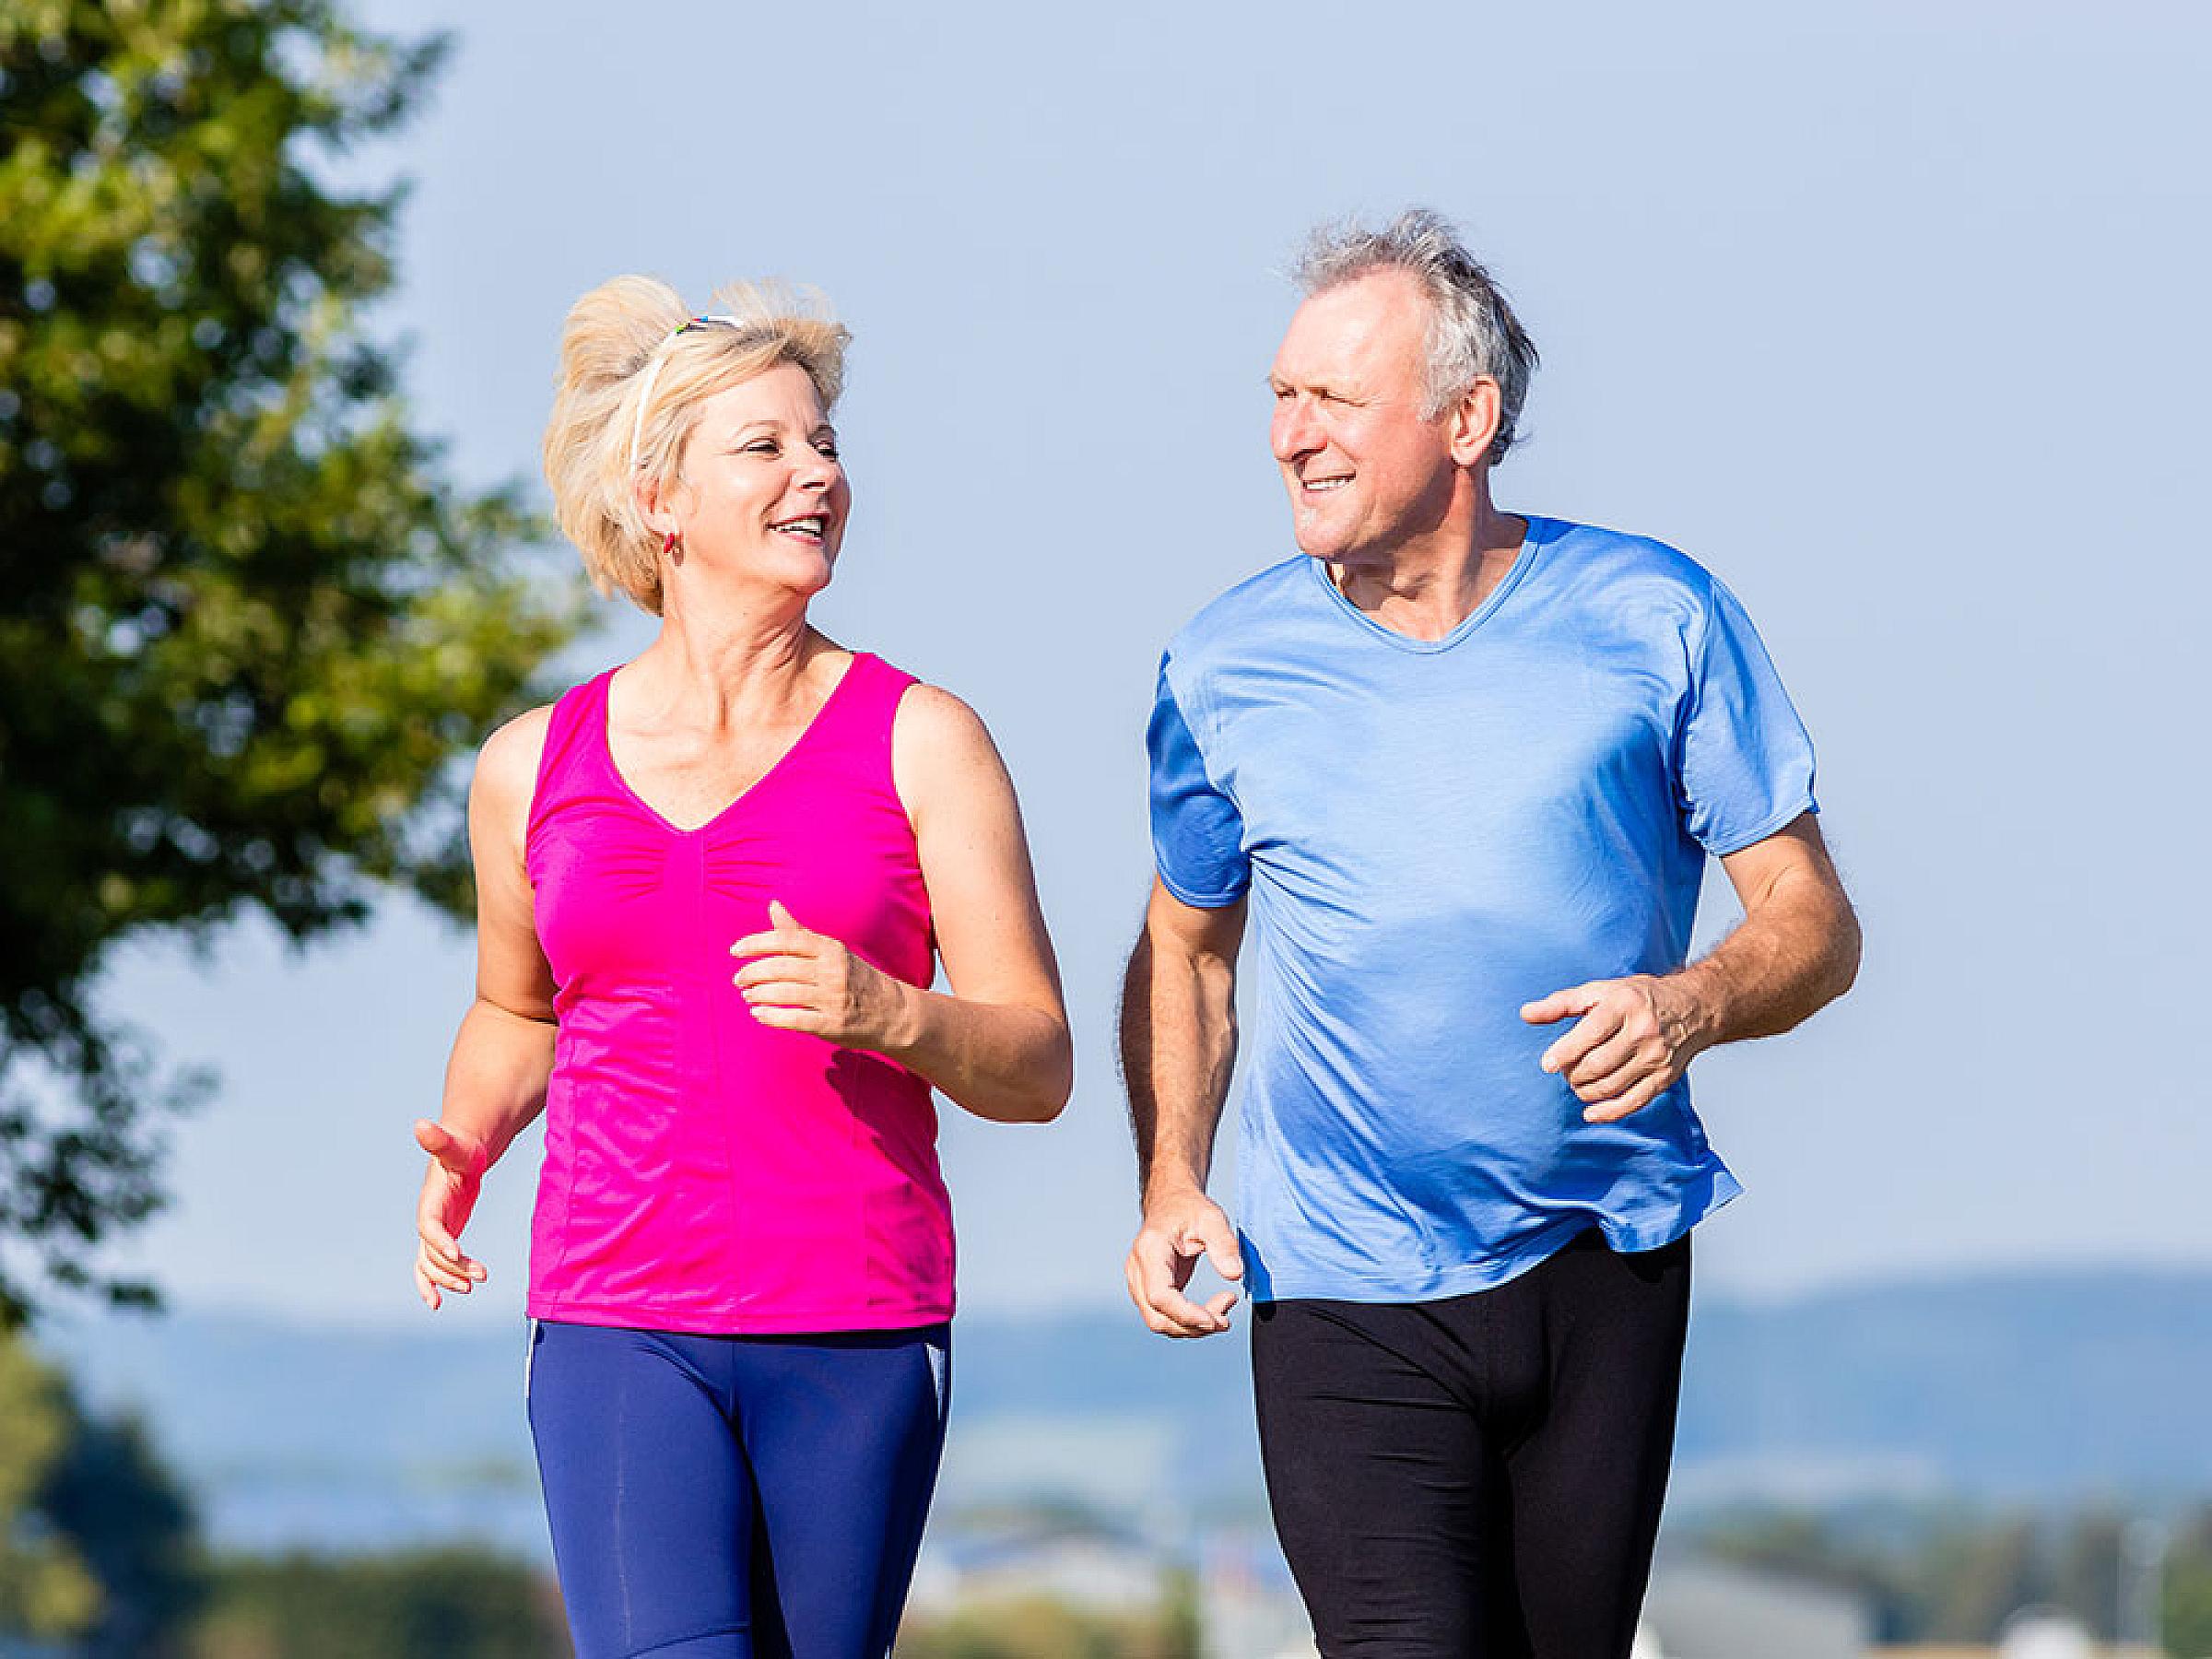 Man and woman running outdoors